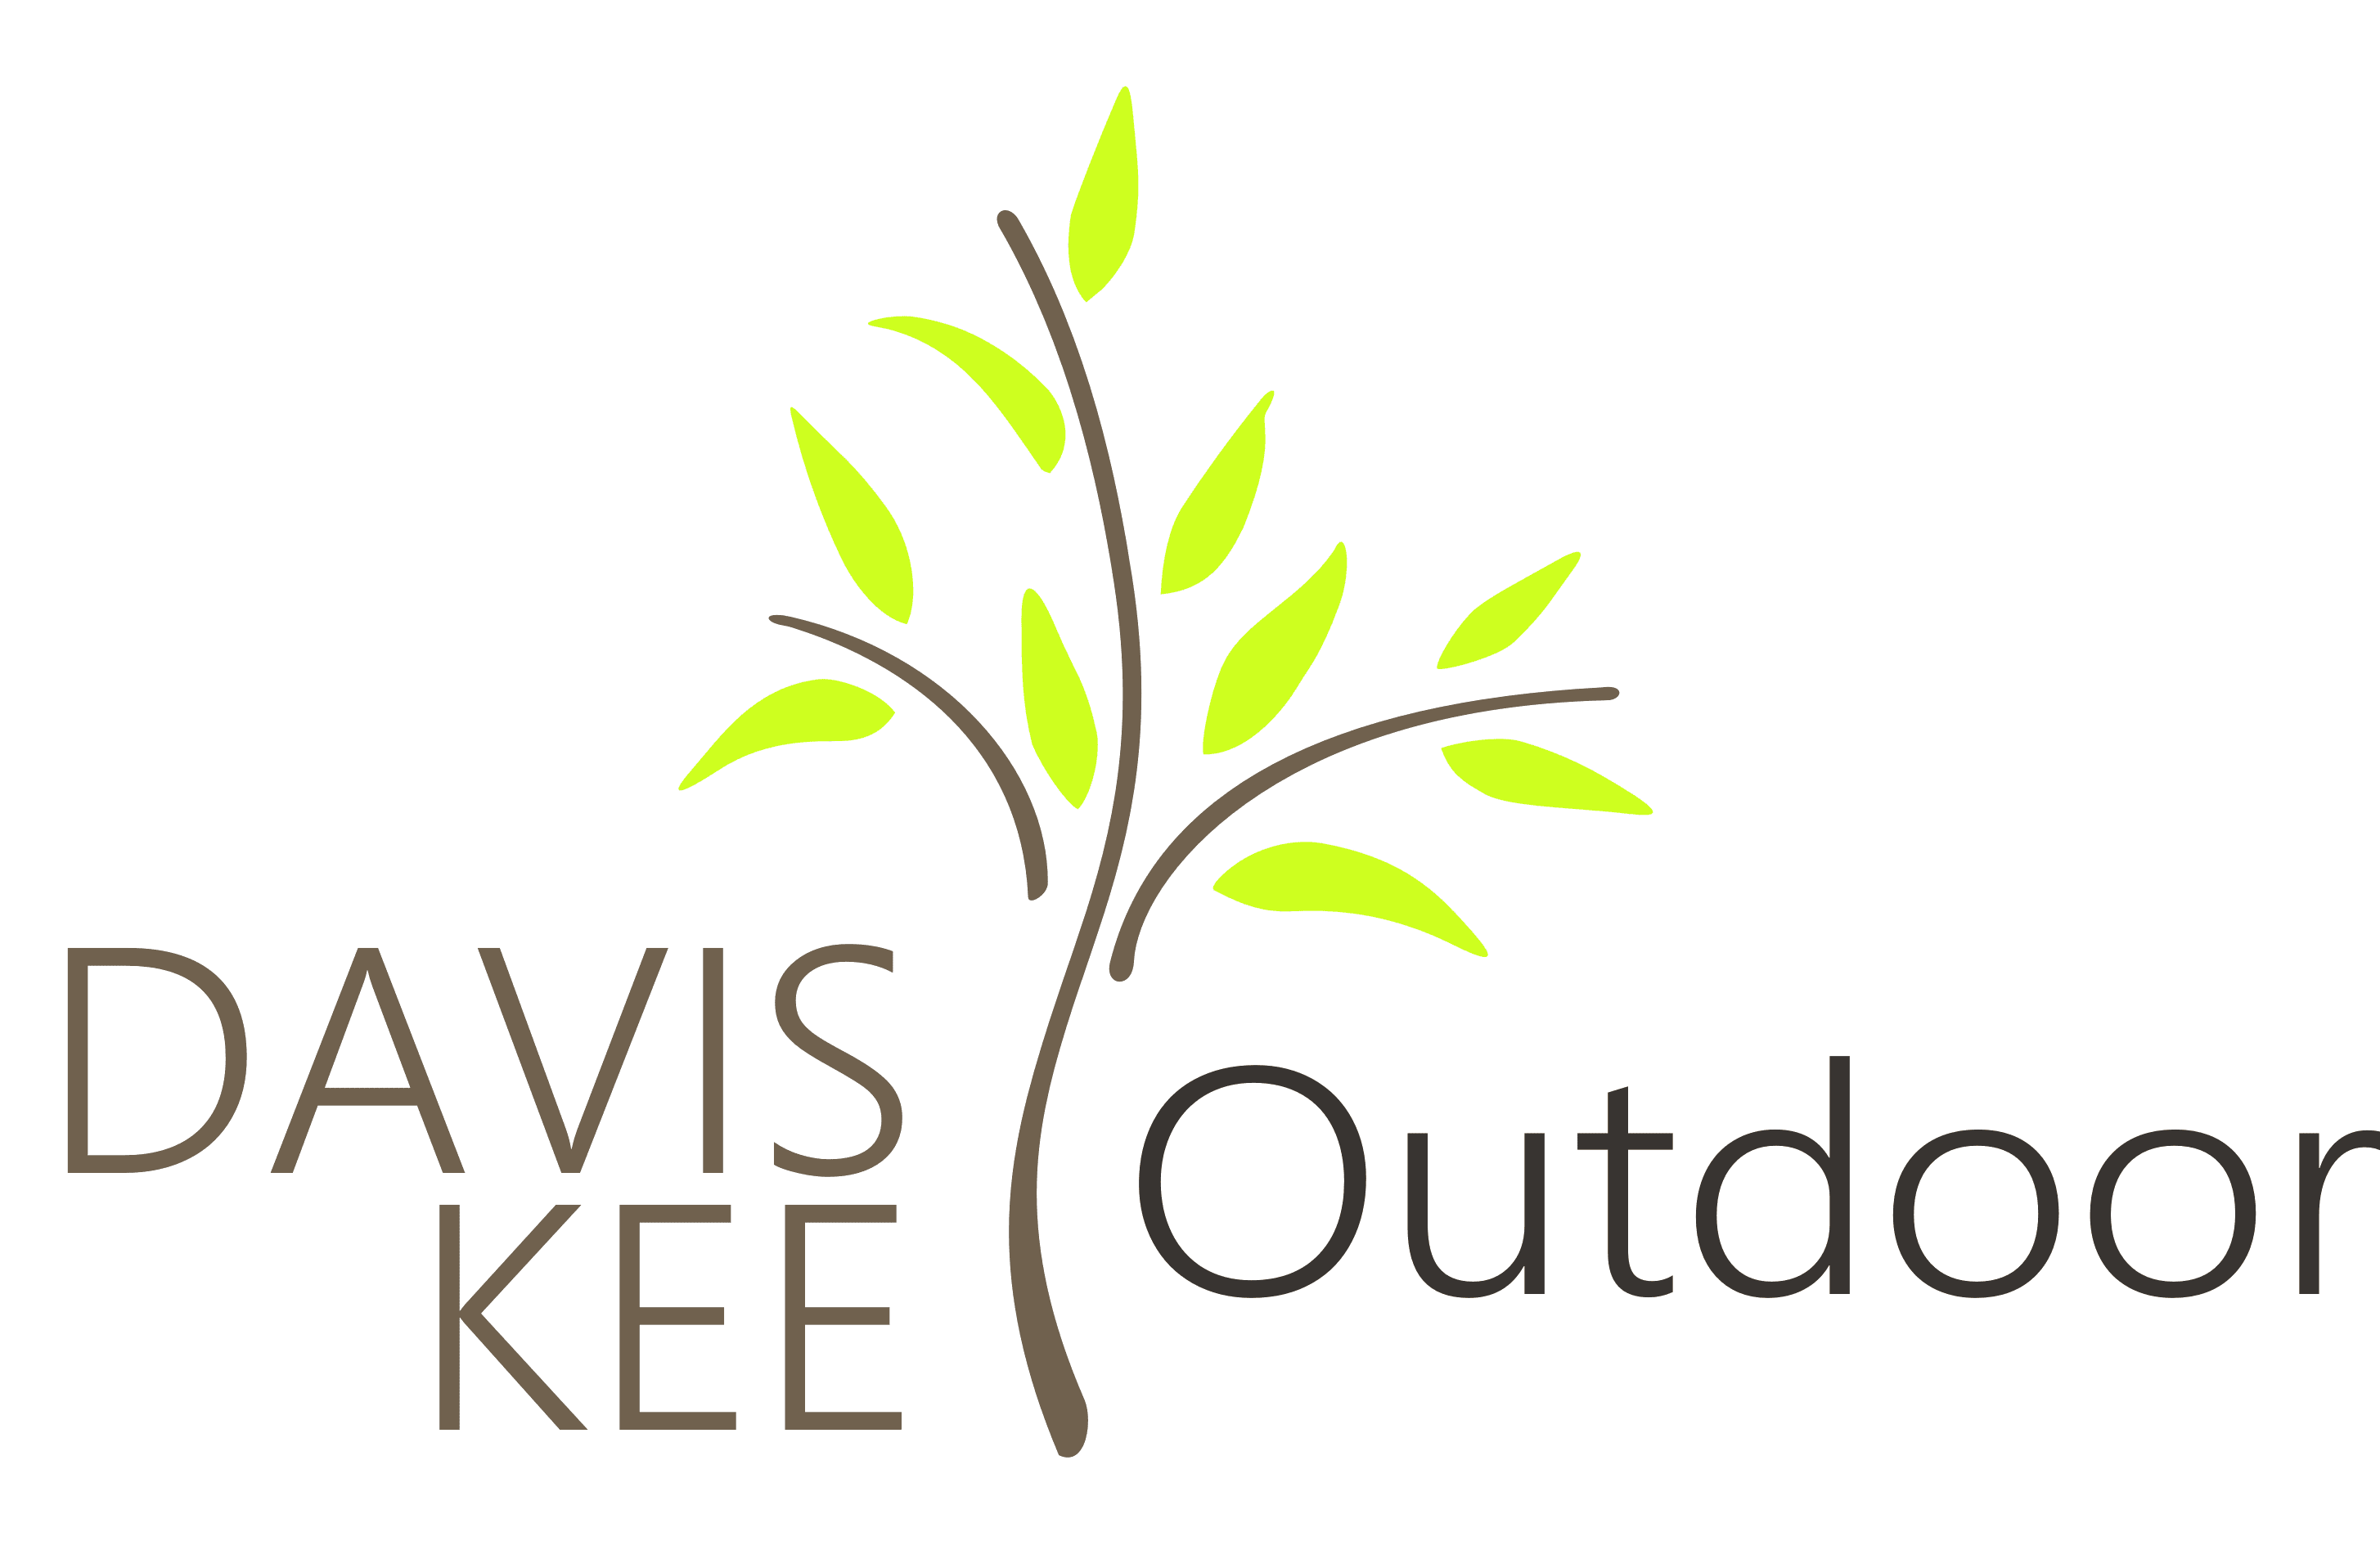 Chattanooga's Premier Lawn Care and Landscaping Professionals, Davis Kee Outdoor Professional Lawn Care and Landscaping Services.